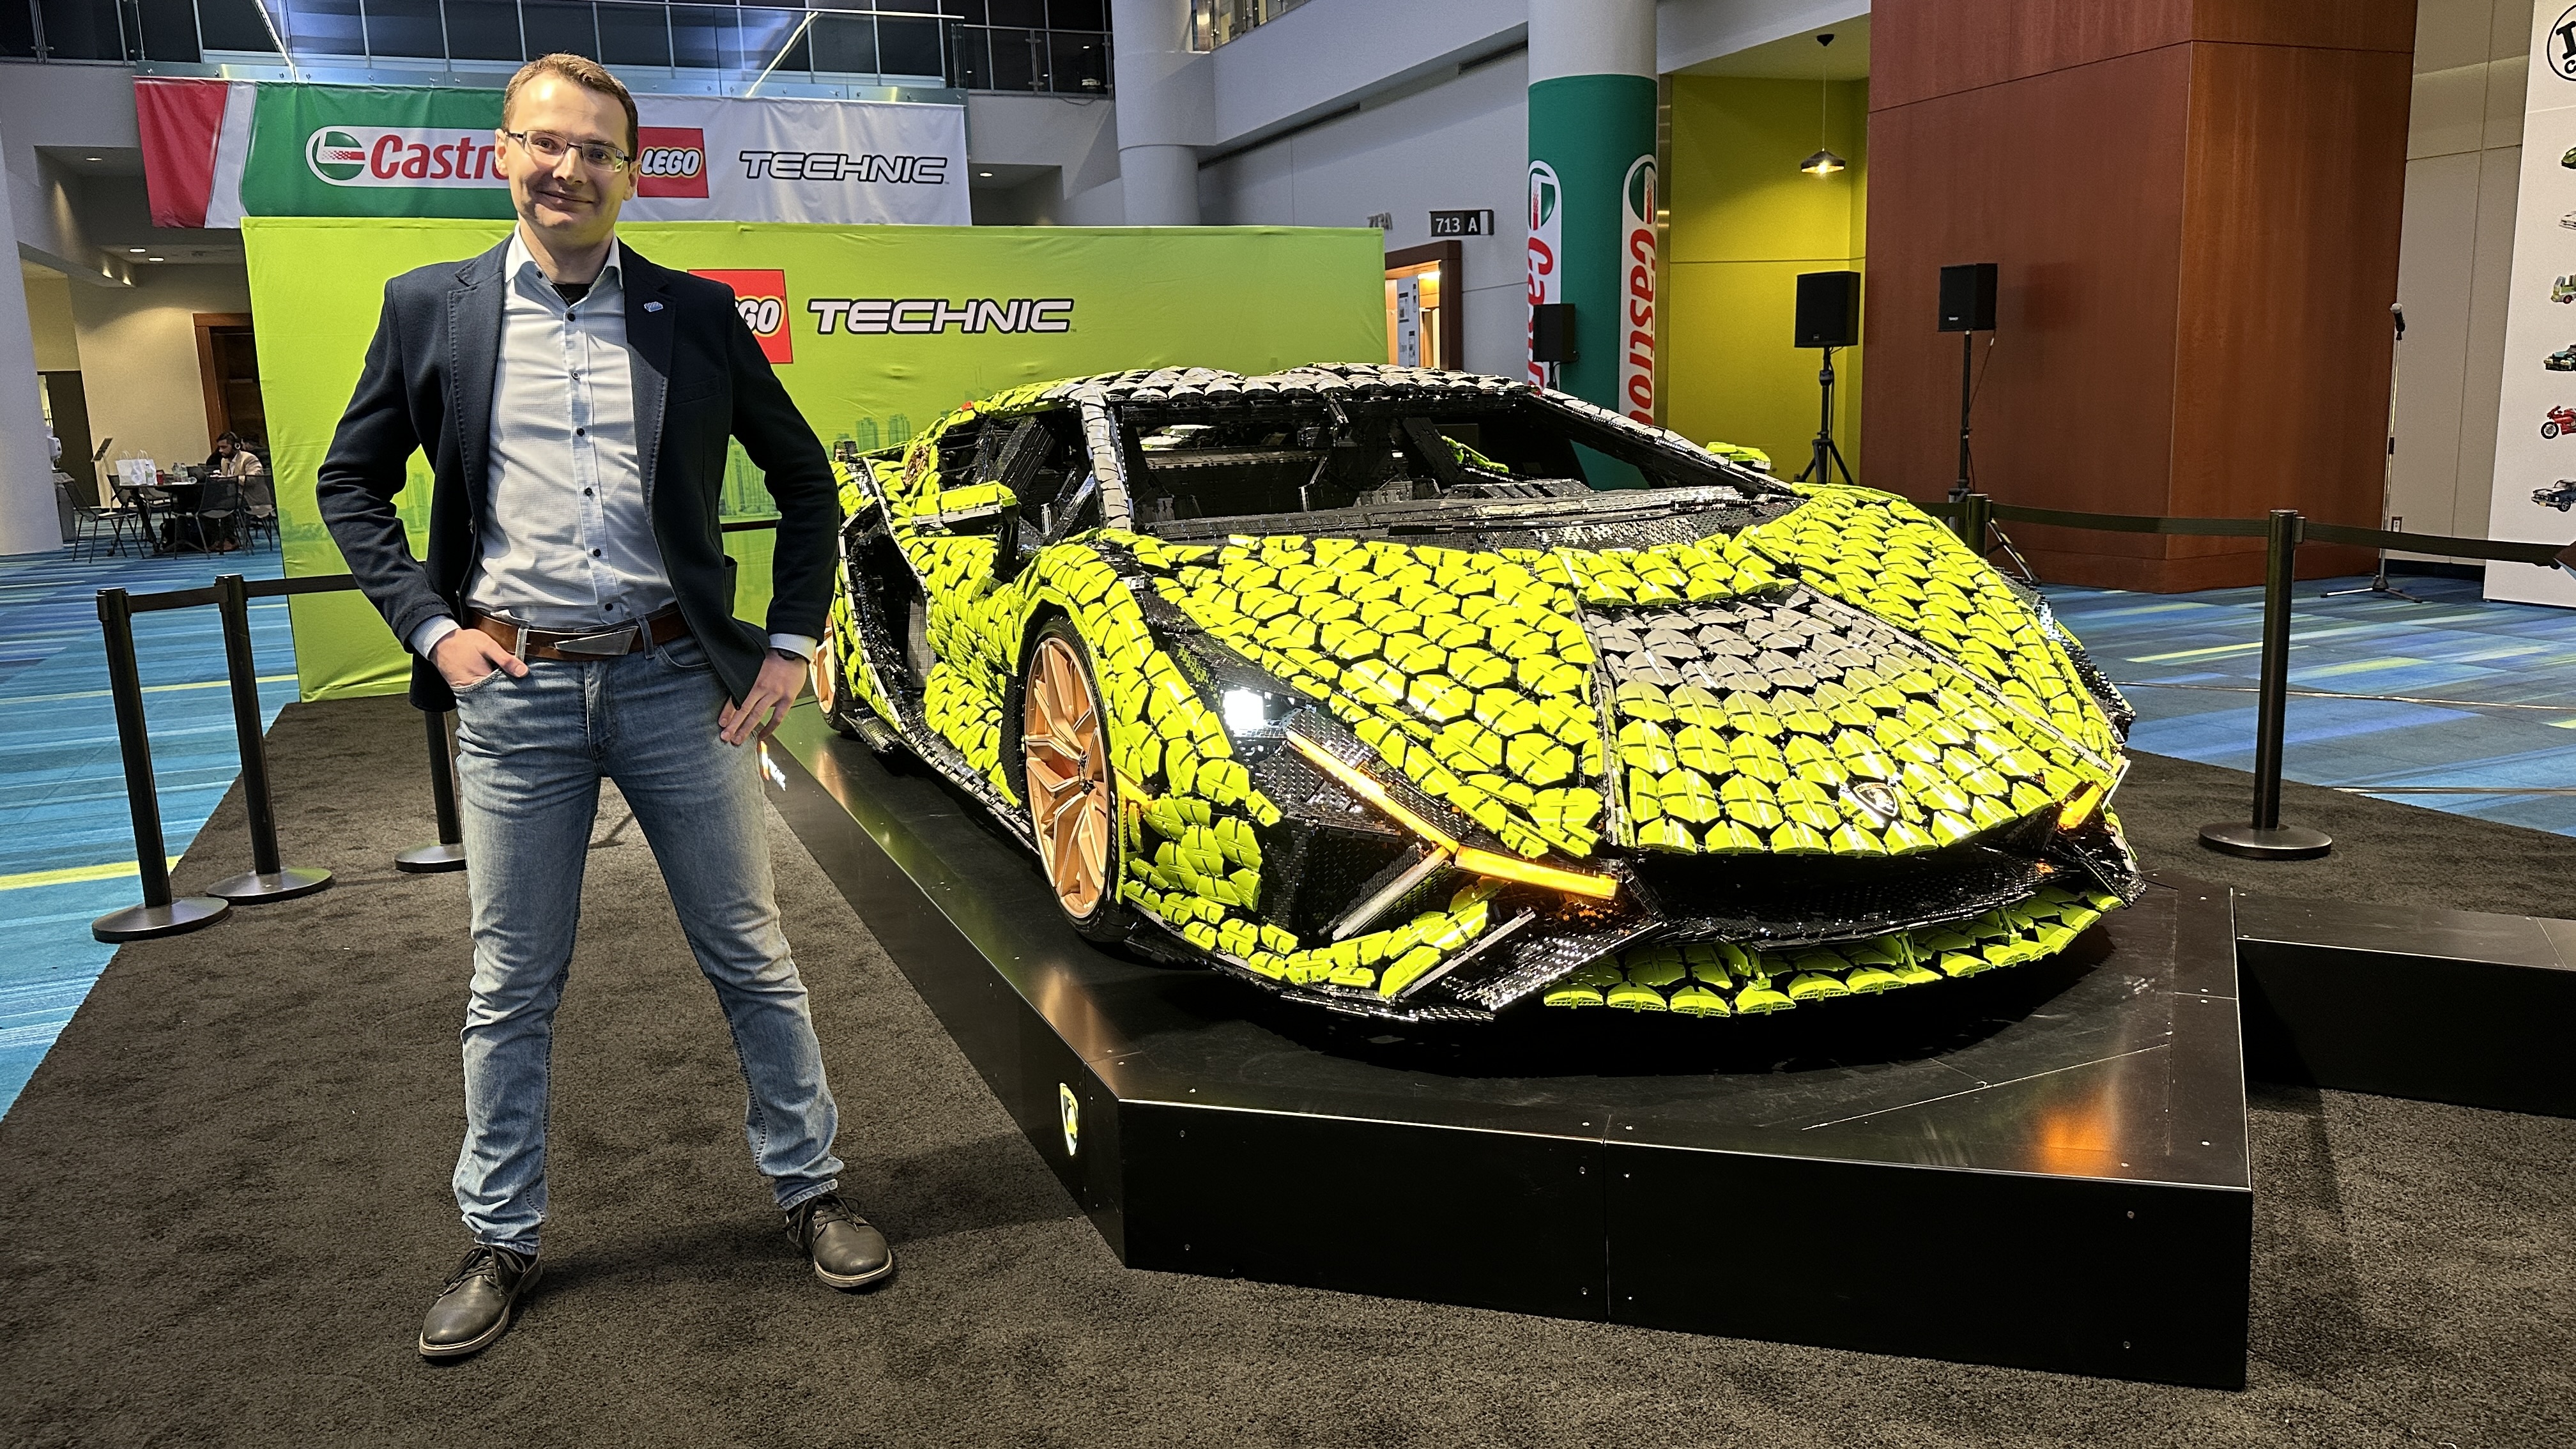 Lego Lamborghini designer meets real Sian for first time at